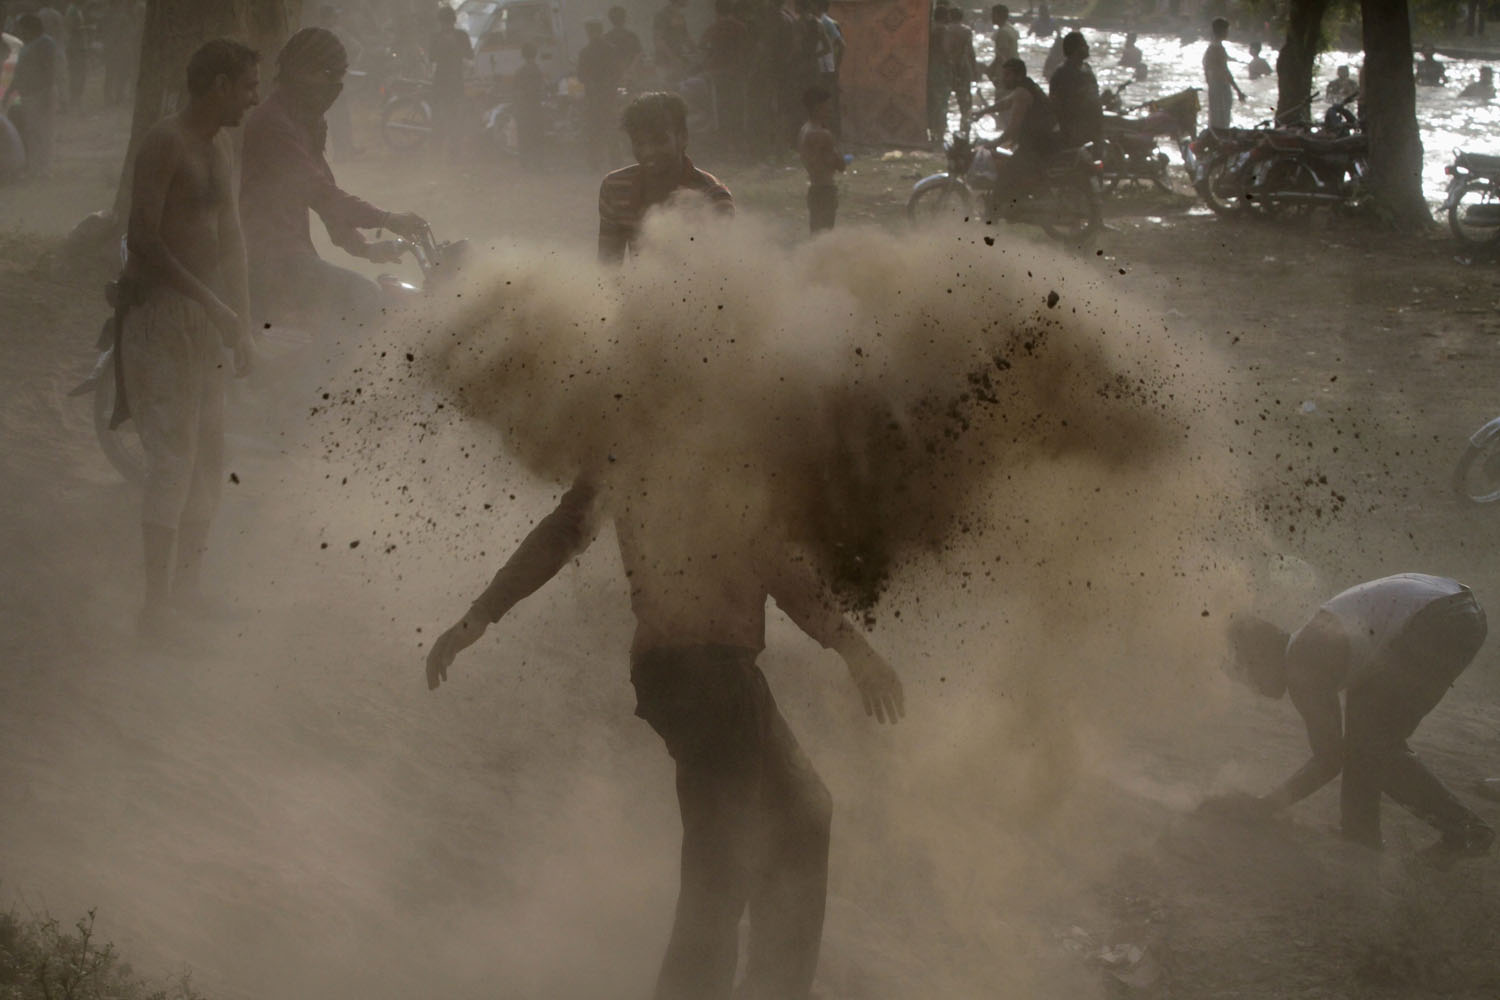 Locals play with dirt before a dip to cool off in a nearby canal on a hot day in Lahore